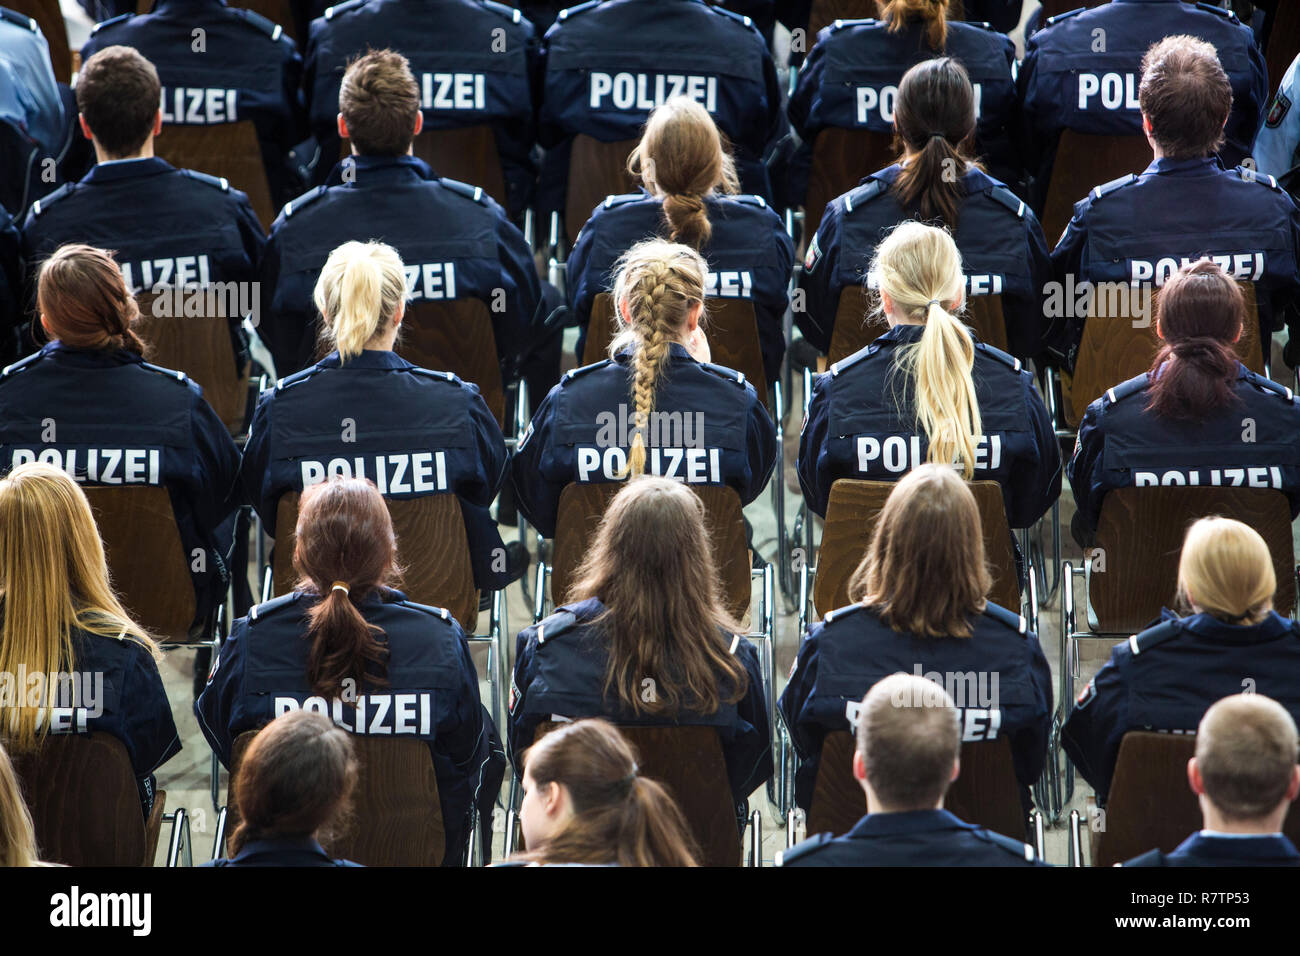 Police commissioner candidates, trainees of the Polizei NRW or North Rhine-Westphalia Police, sitting at a meeting in an Stock Photo